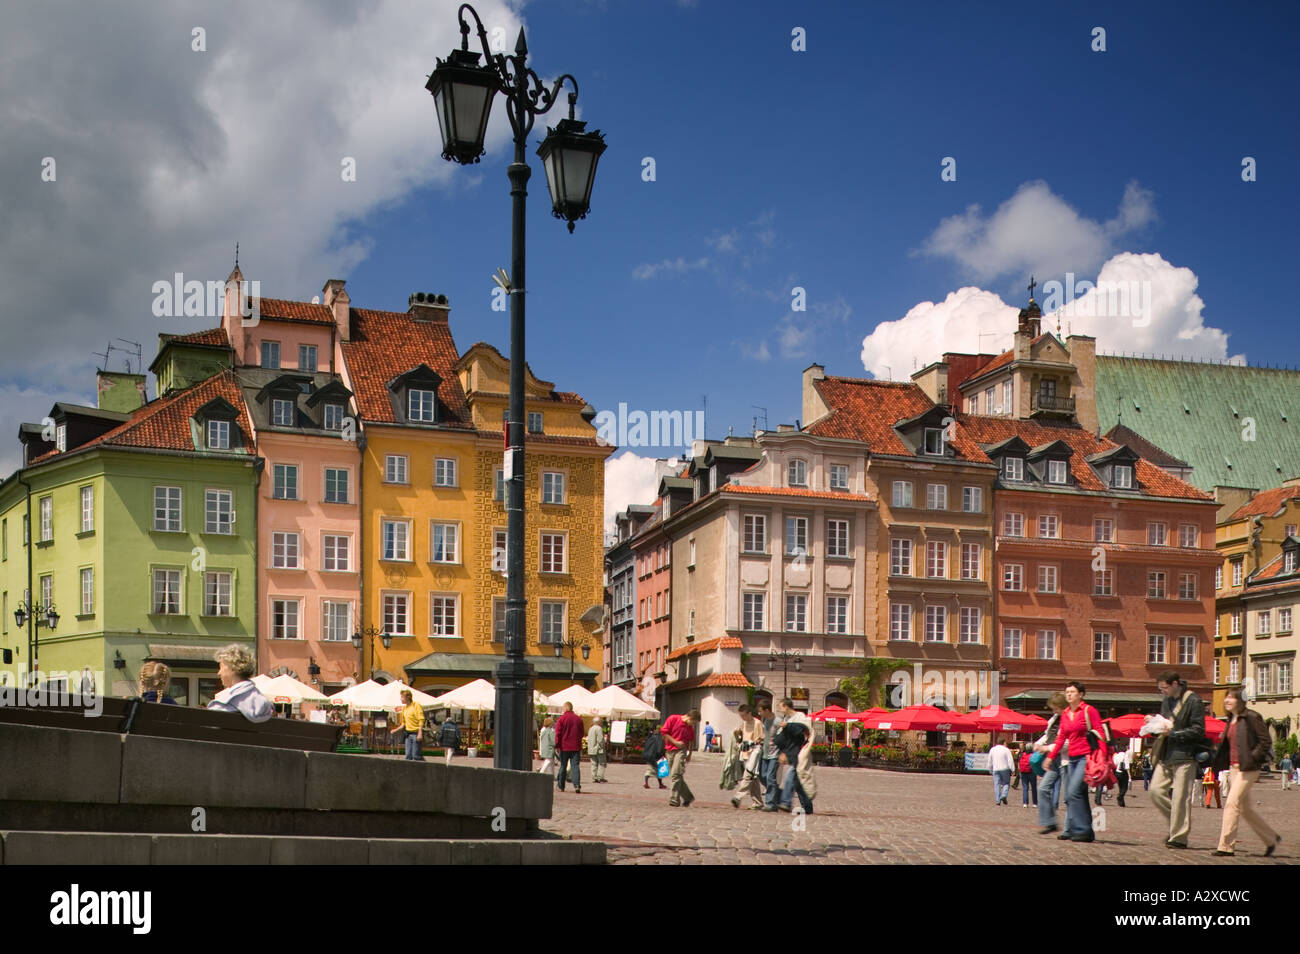 Plac Zamkowy (Castle Square) in the Old Town, Warsaw. Stock Photo